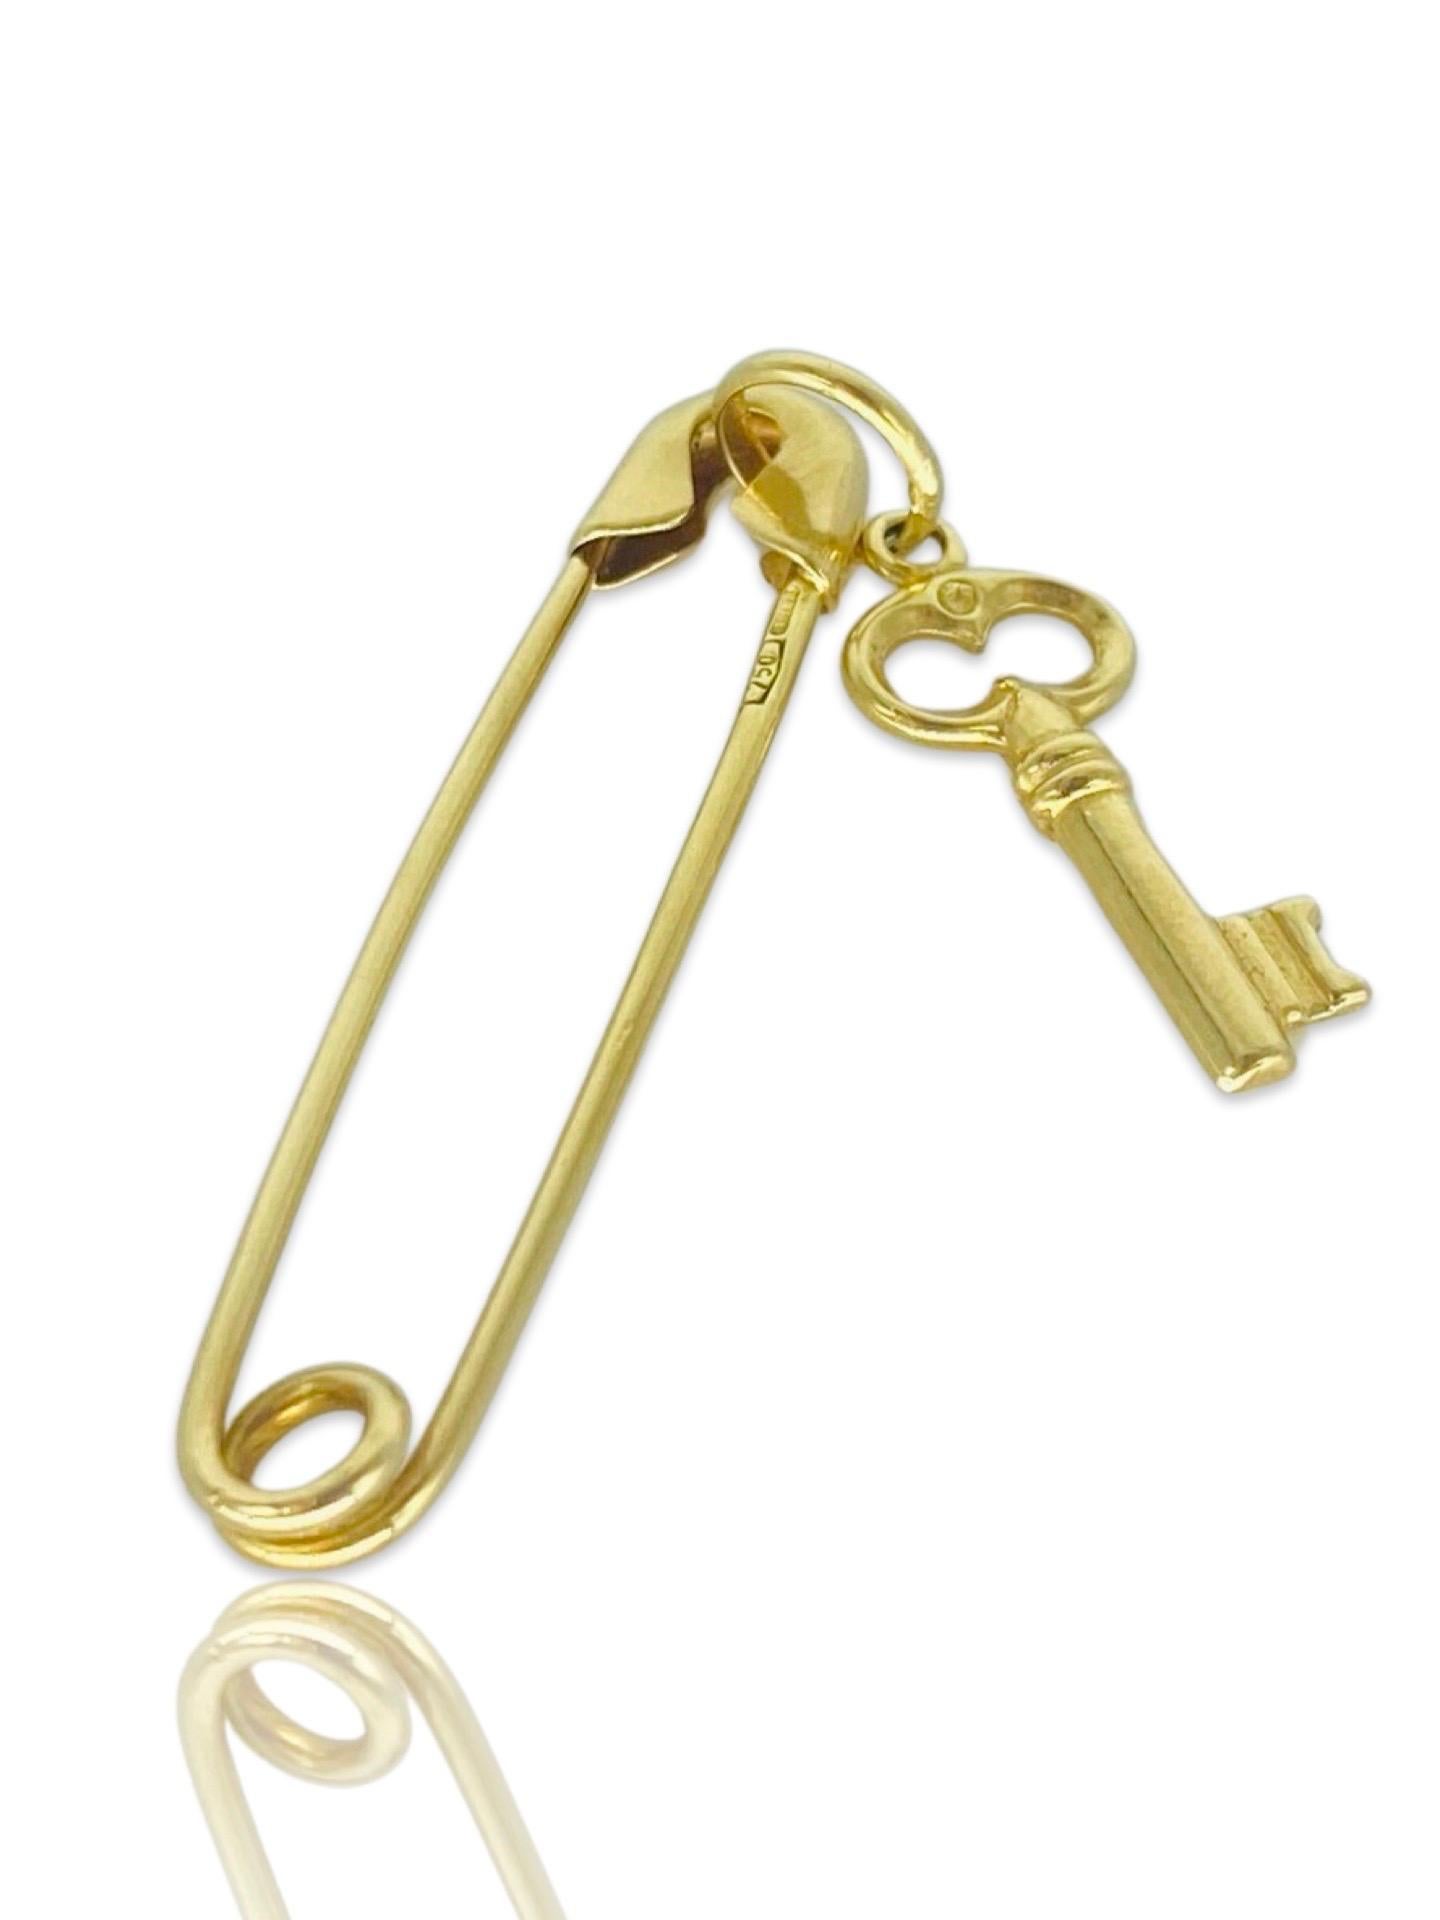 Vintage Safety Key Pin 18k Gold Italy In Excellent Condition For Sale In Miami, FL